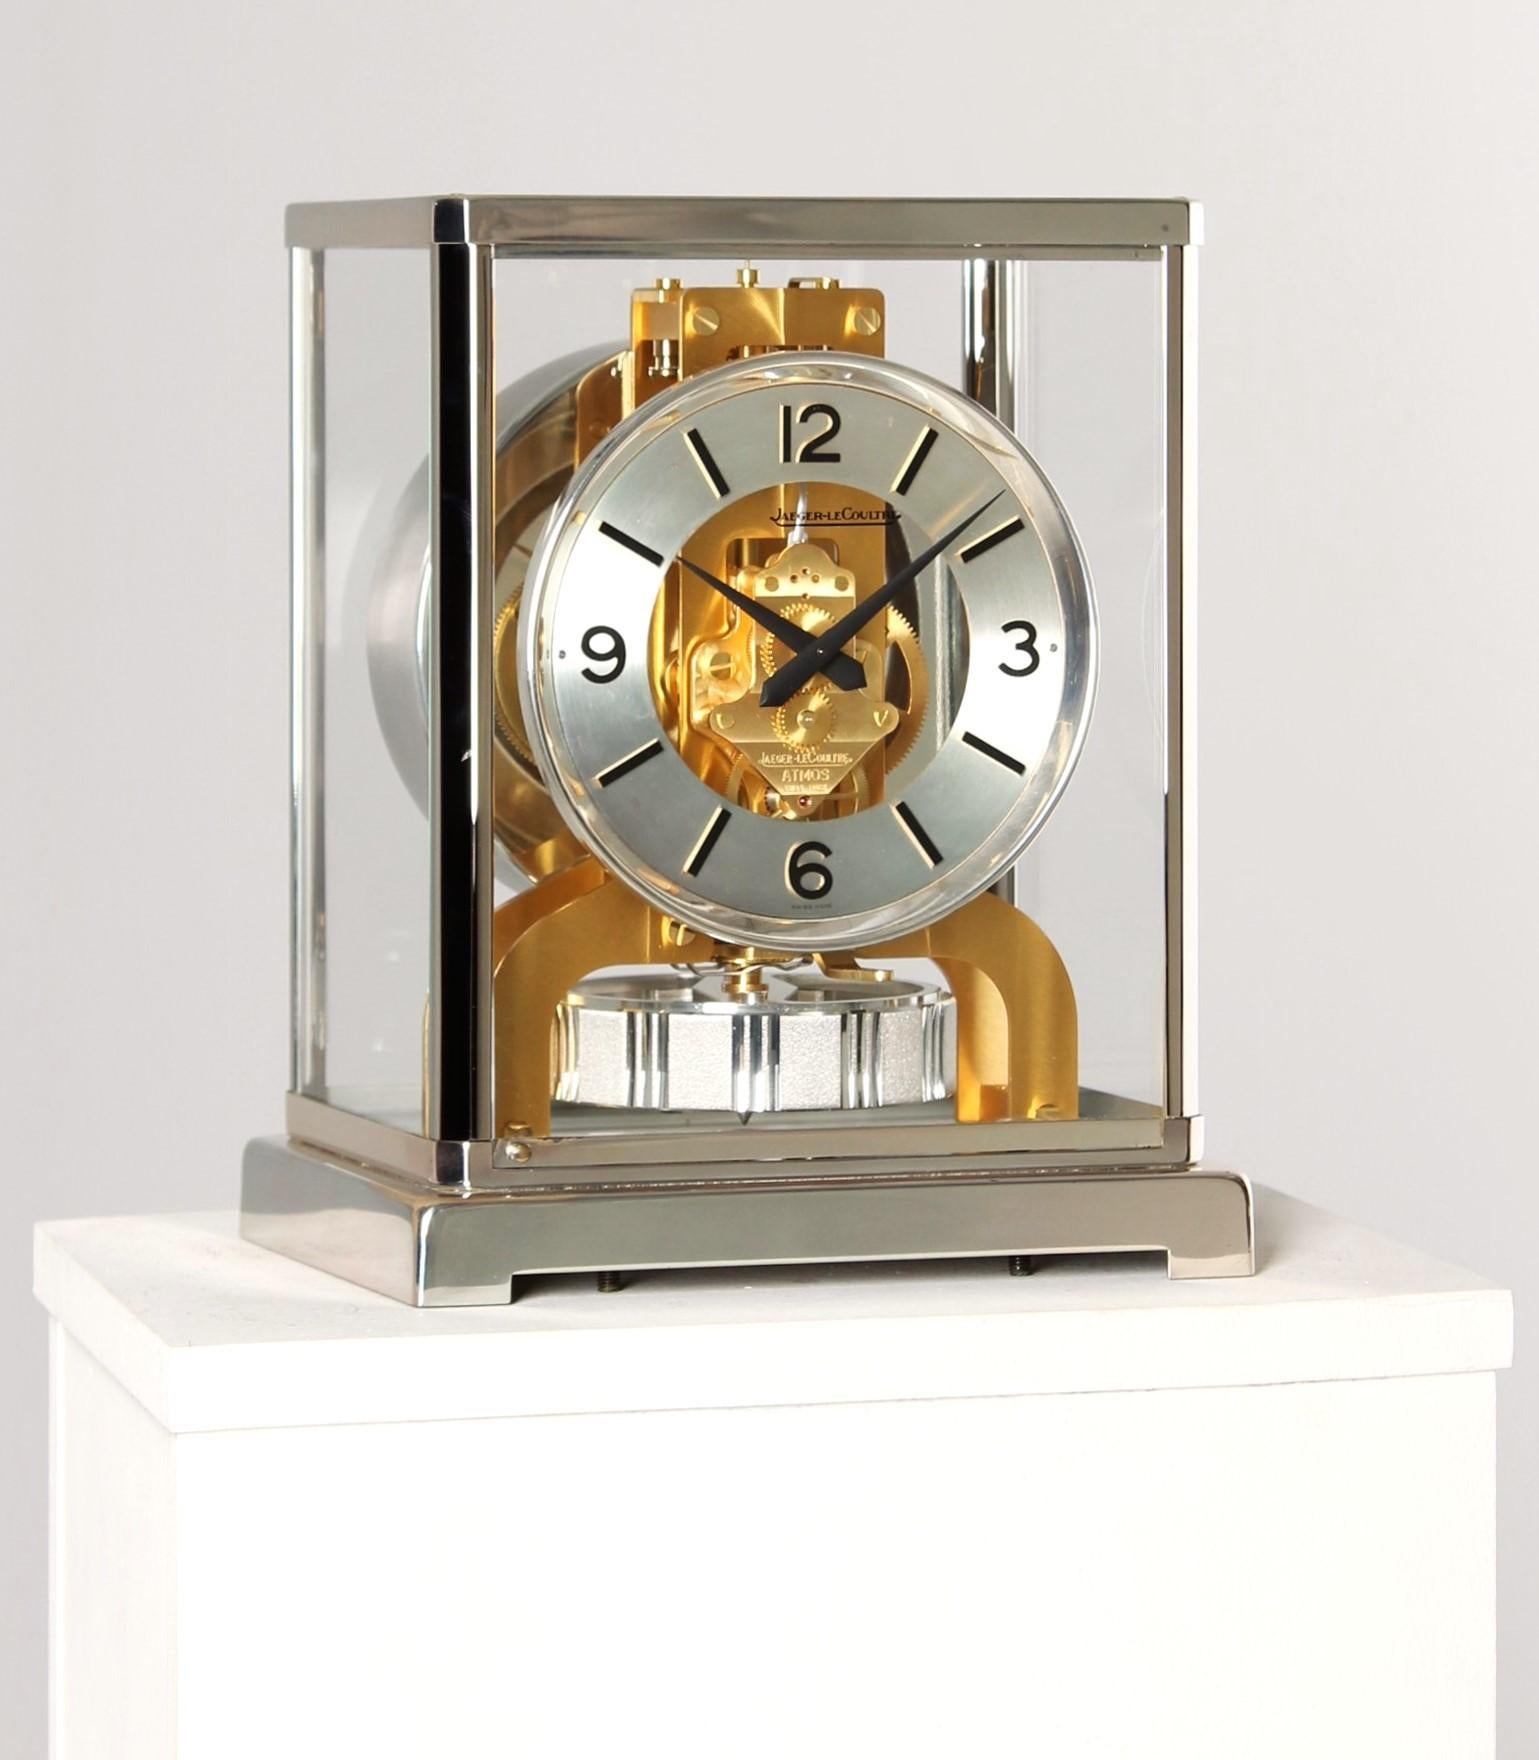 Gilt Jaeger LeCoultre, Bicolor Atmos Clock, Silver and Gold, Manufactured 1978 For Sale